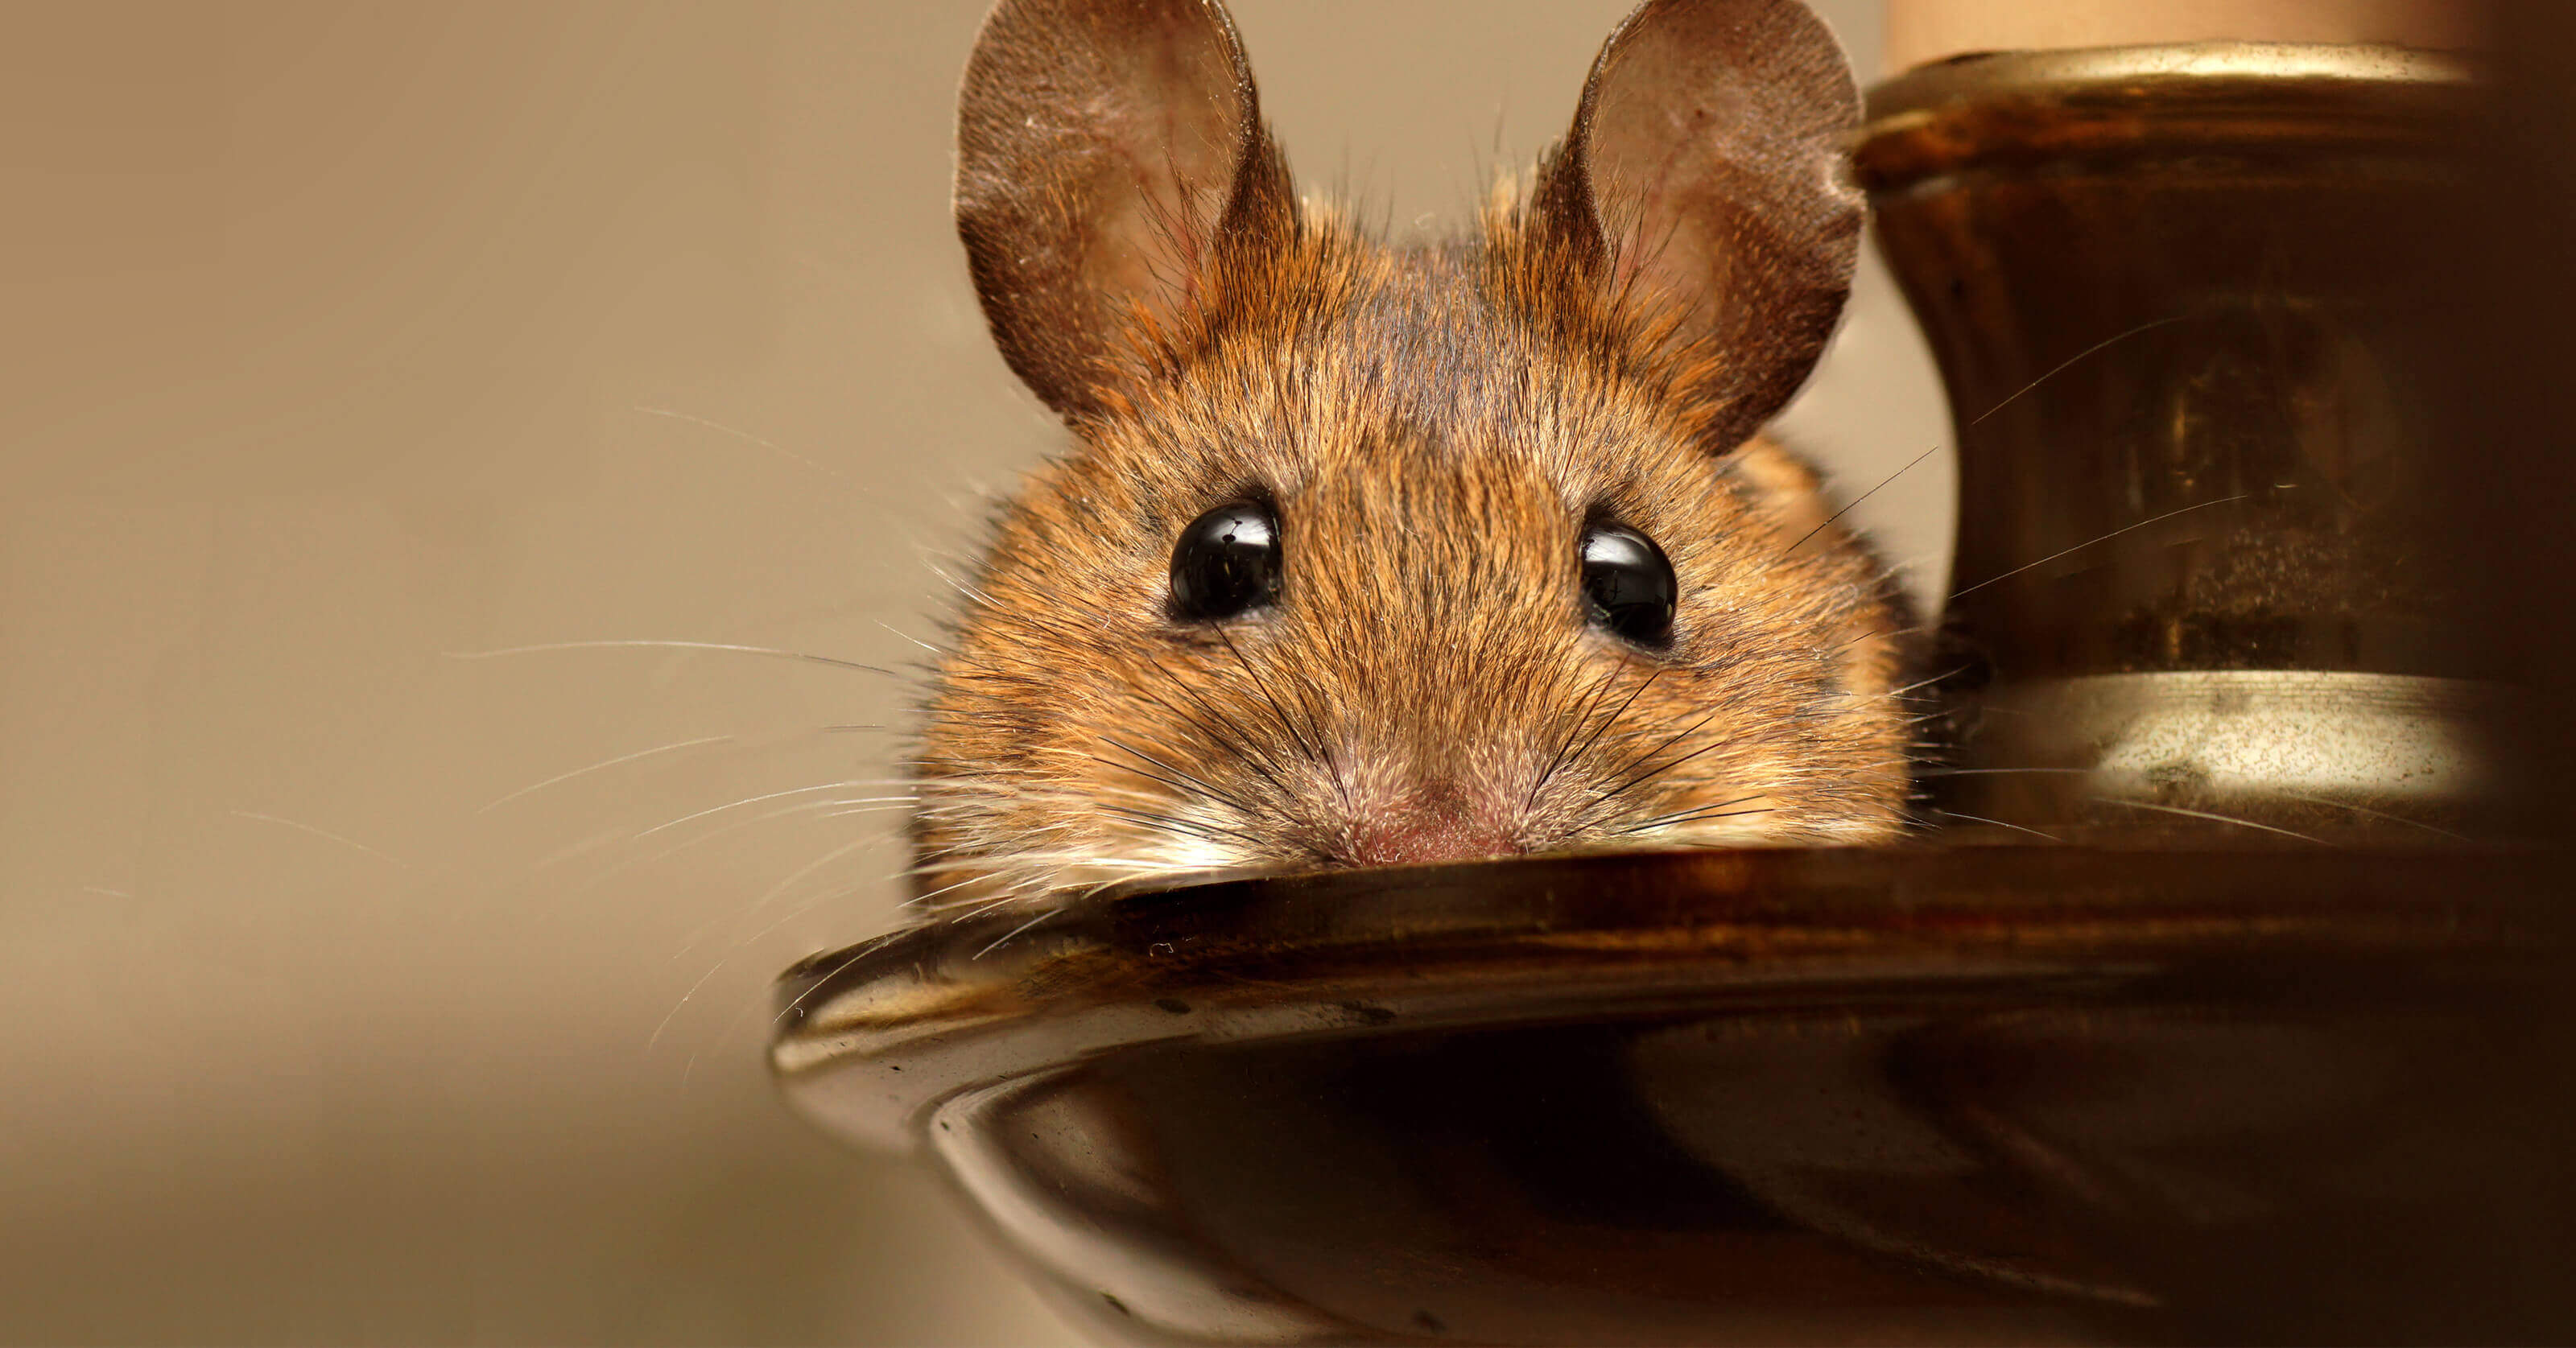 5 Pointers for Defeating Rodents